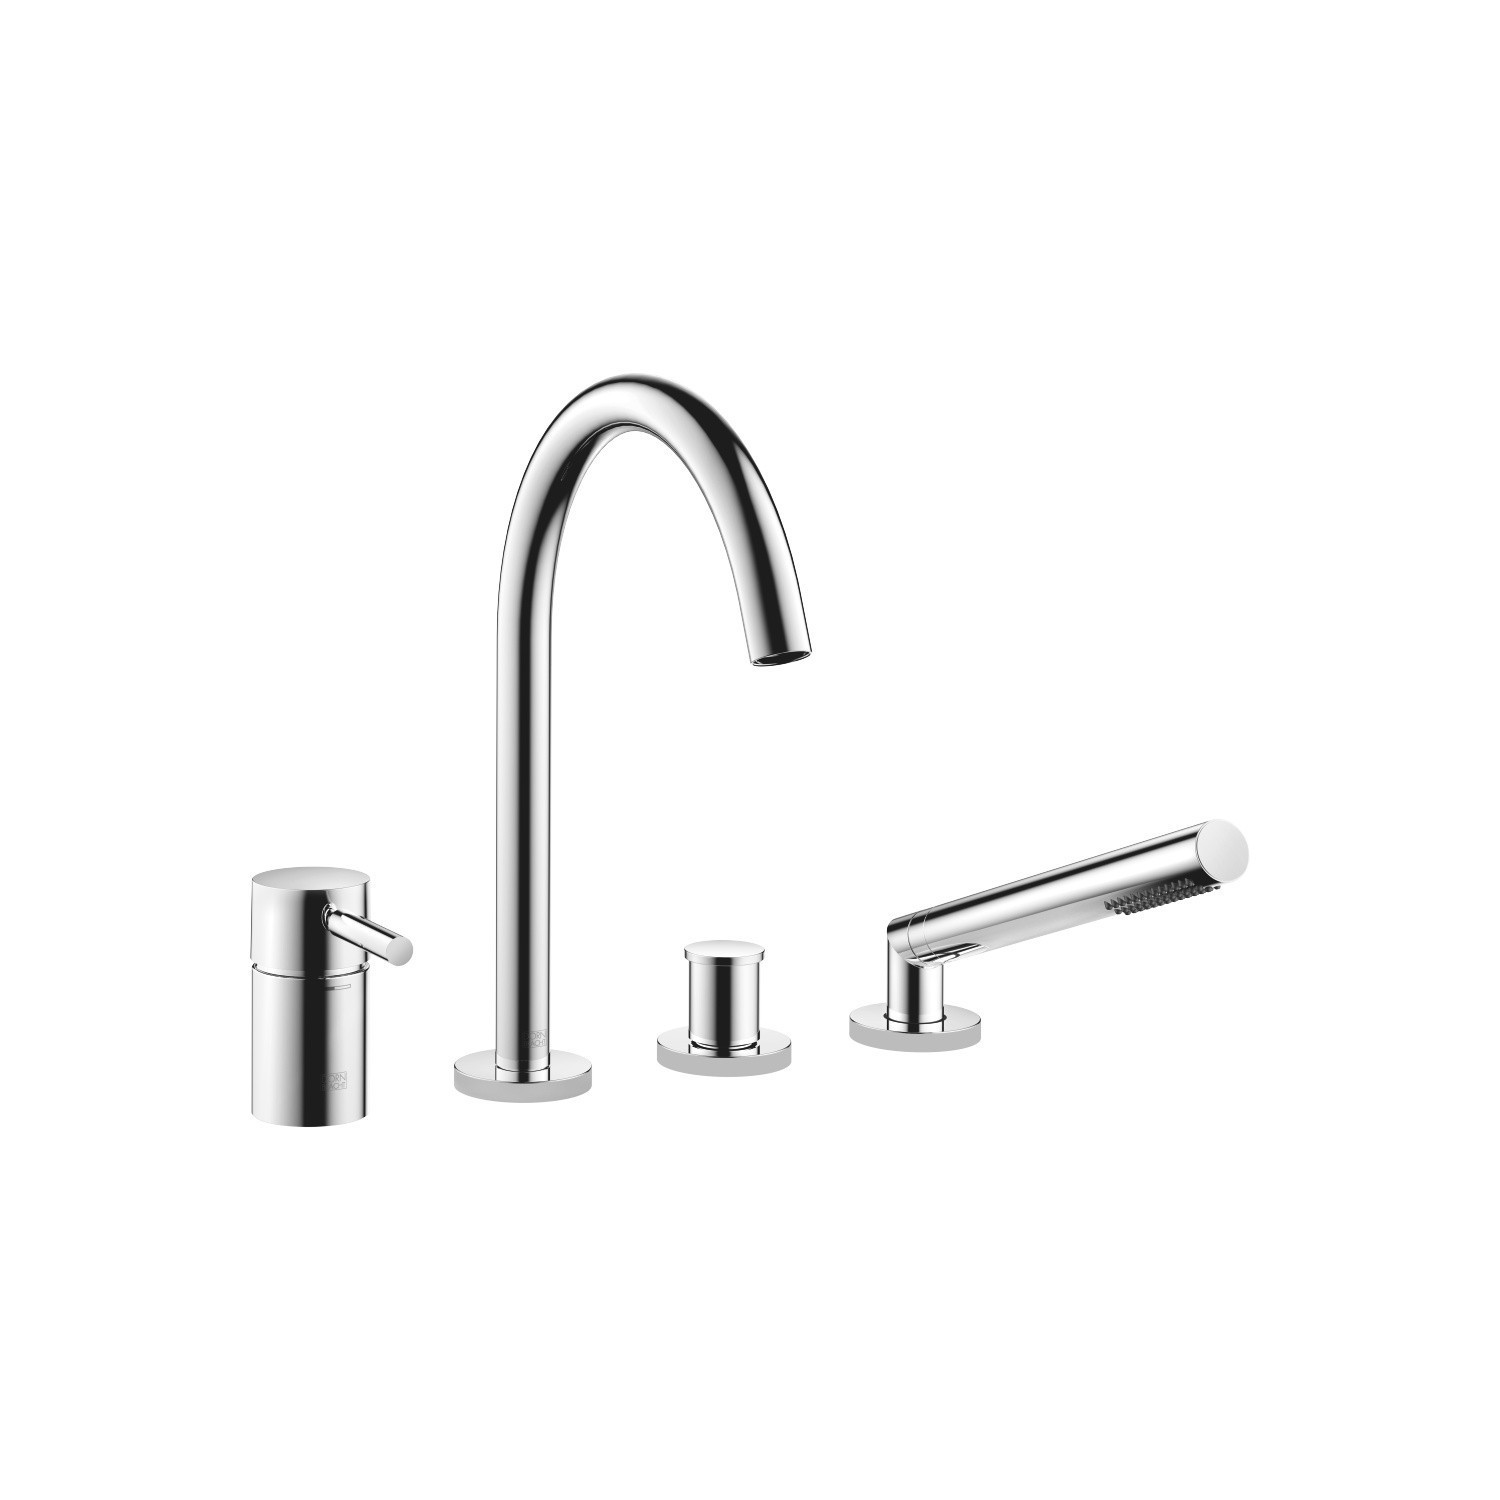 DORNBRACHT 27632661 META FOUR HOLES DECK MOUNT TUB FILLER WITH HAND SHOWER AND LEVER HANDLE